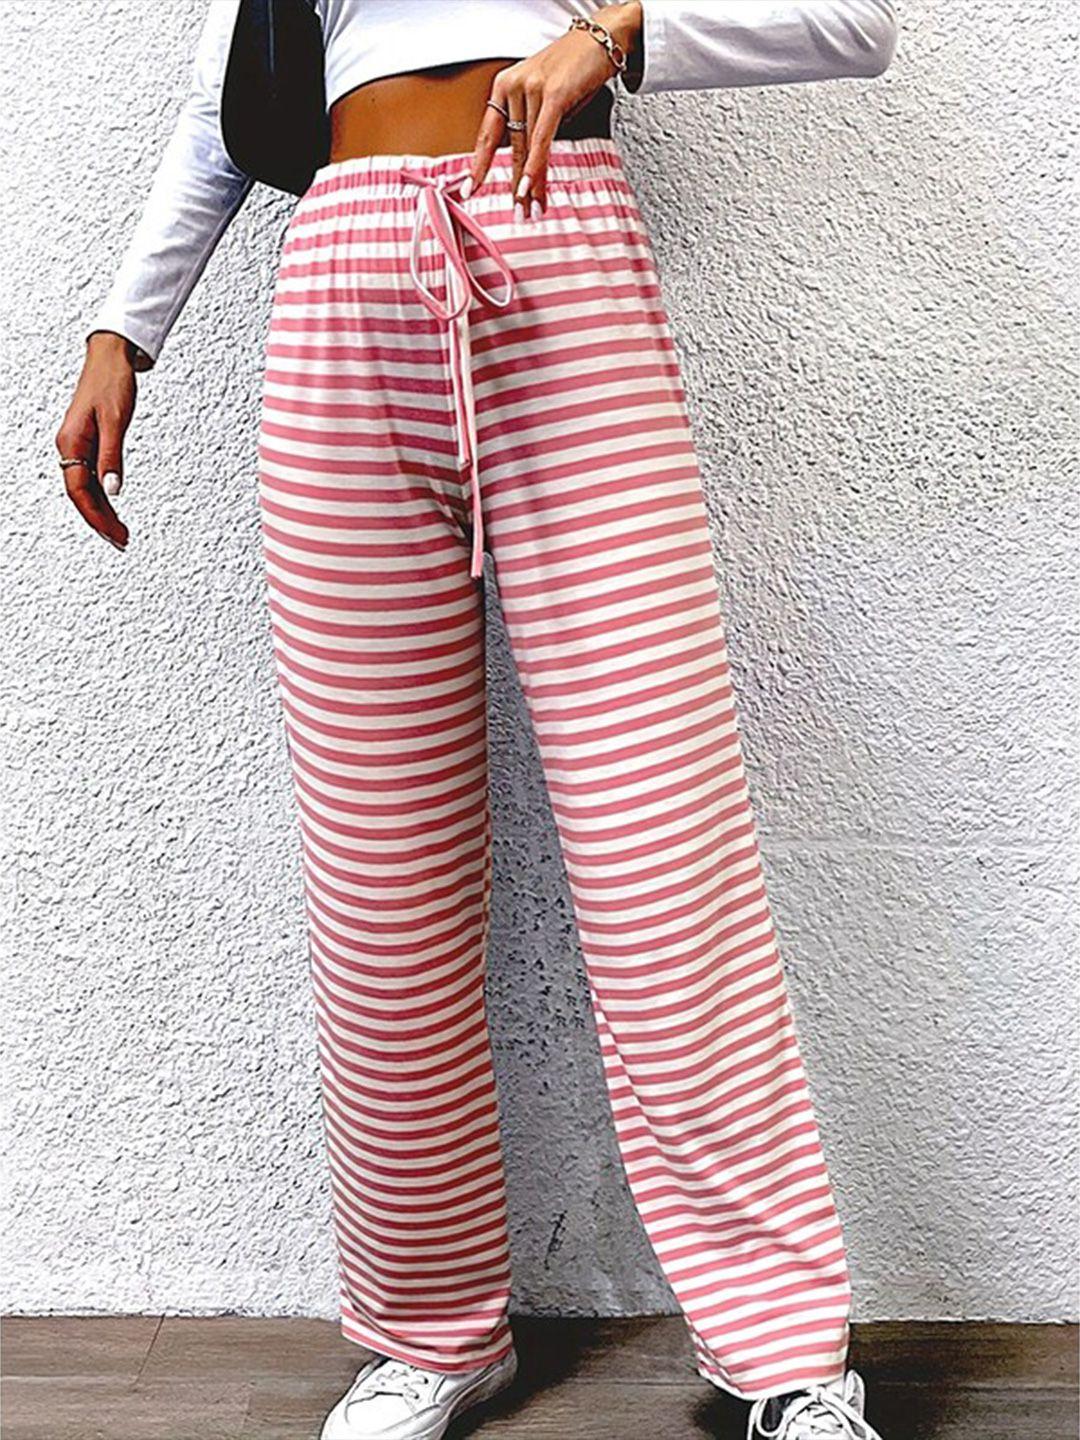 stylecast-women-pink-striped-high-rise-easy-wash-trousers